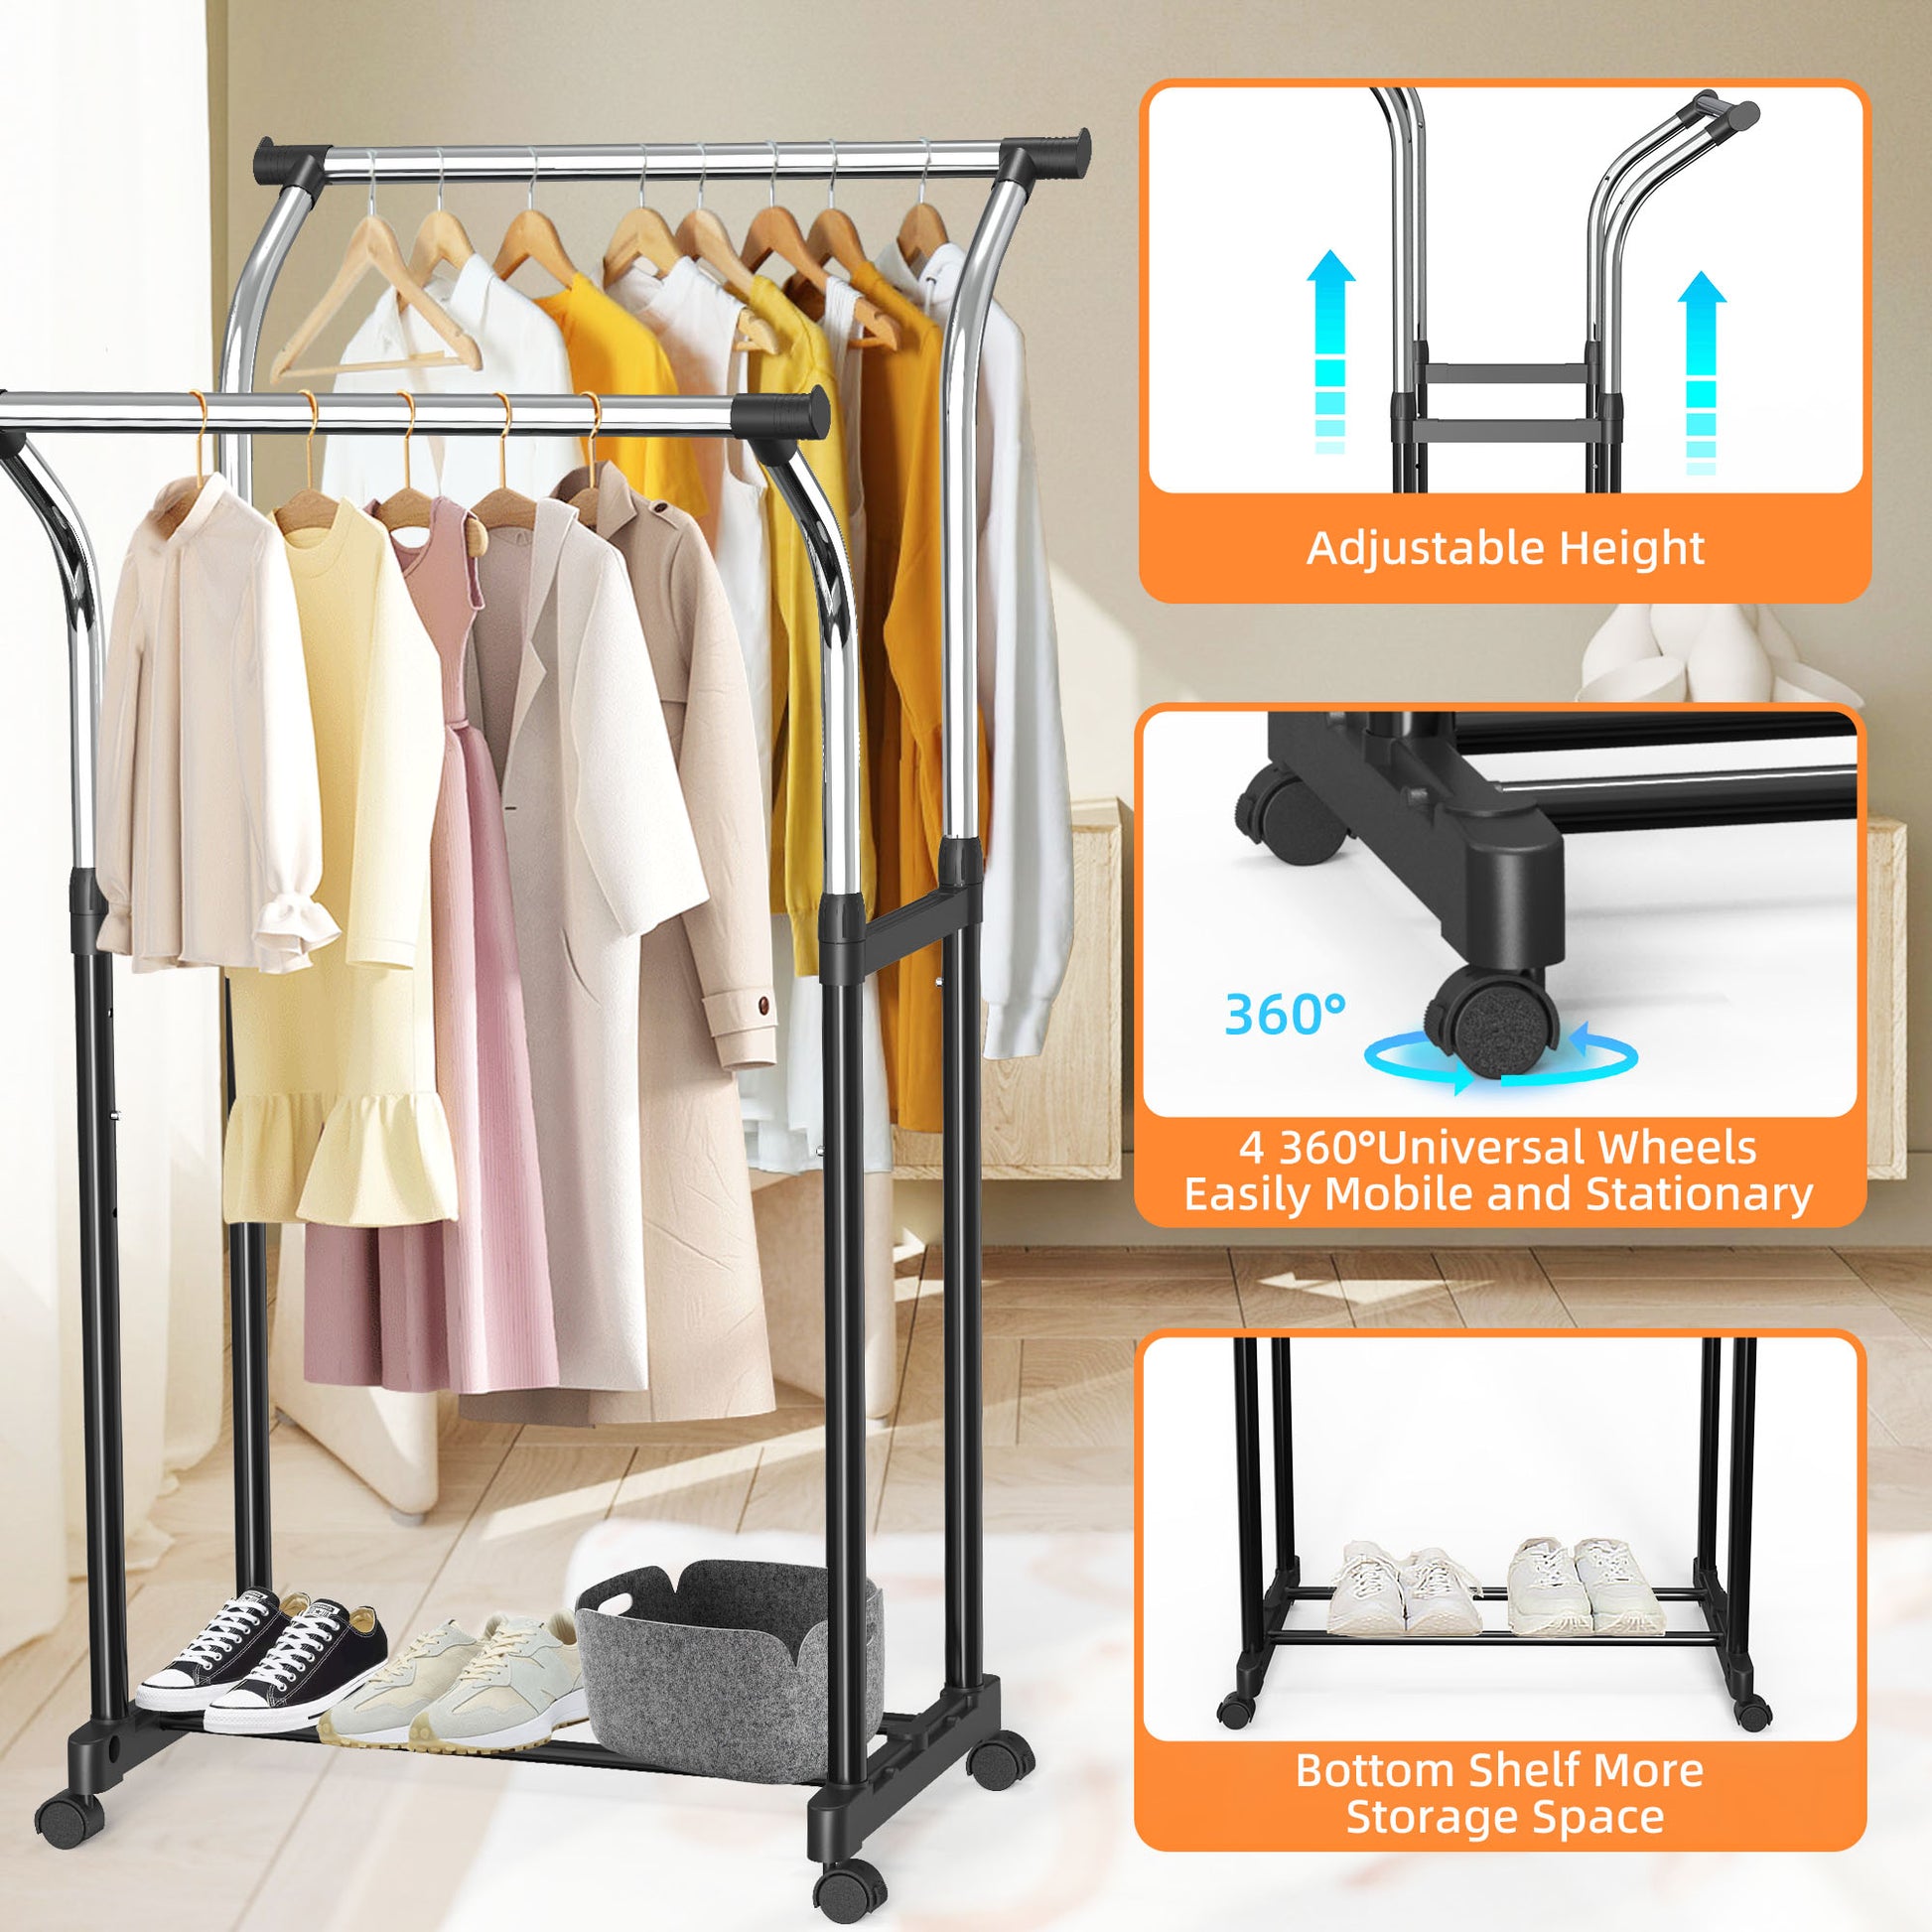 Garment Rack Clothes Hanger Rolling Collapsible Clothing Shelf